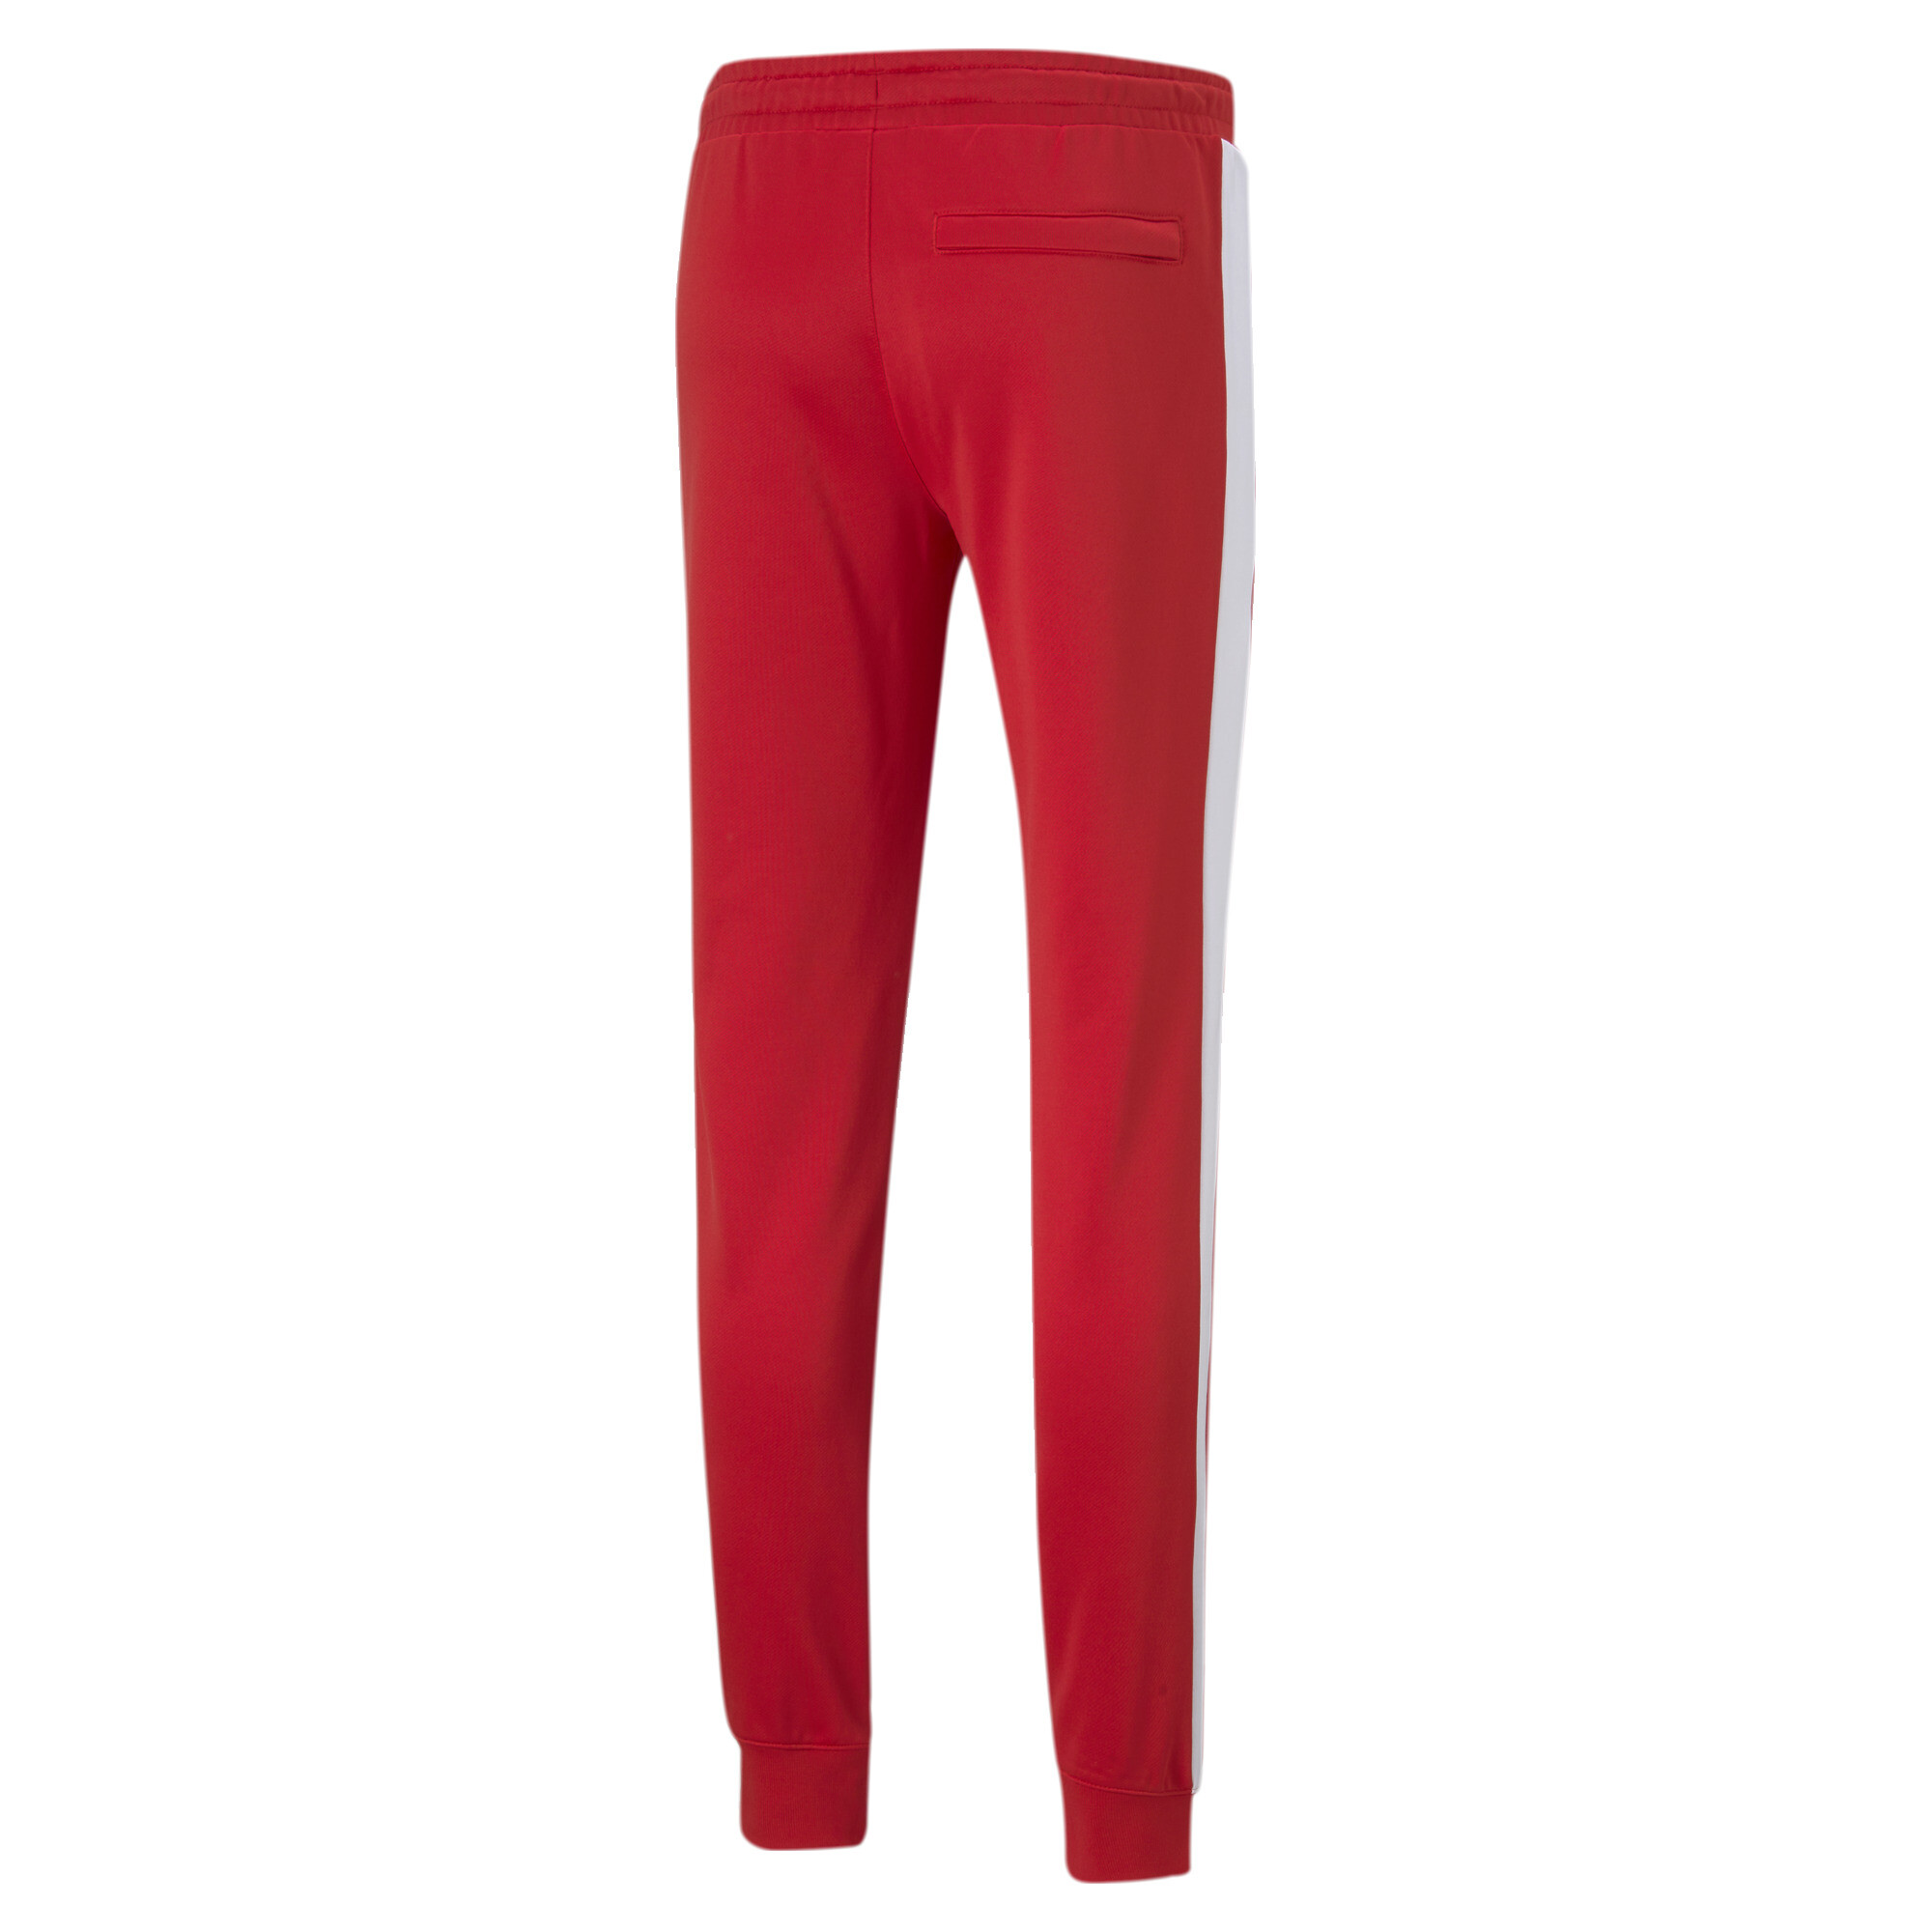 Men's PUMA Iconic T7 Track Pants In Red, Size Small